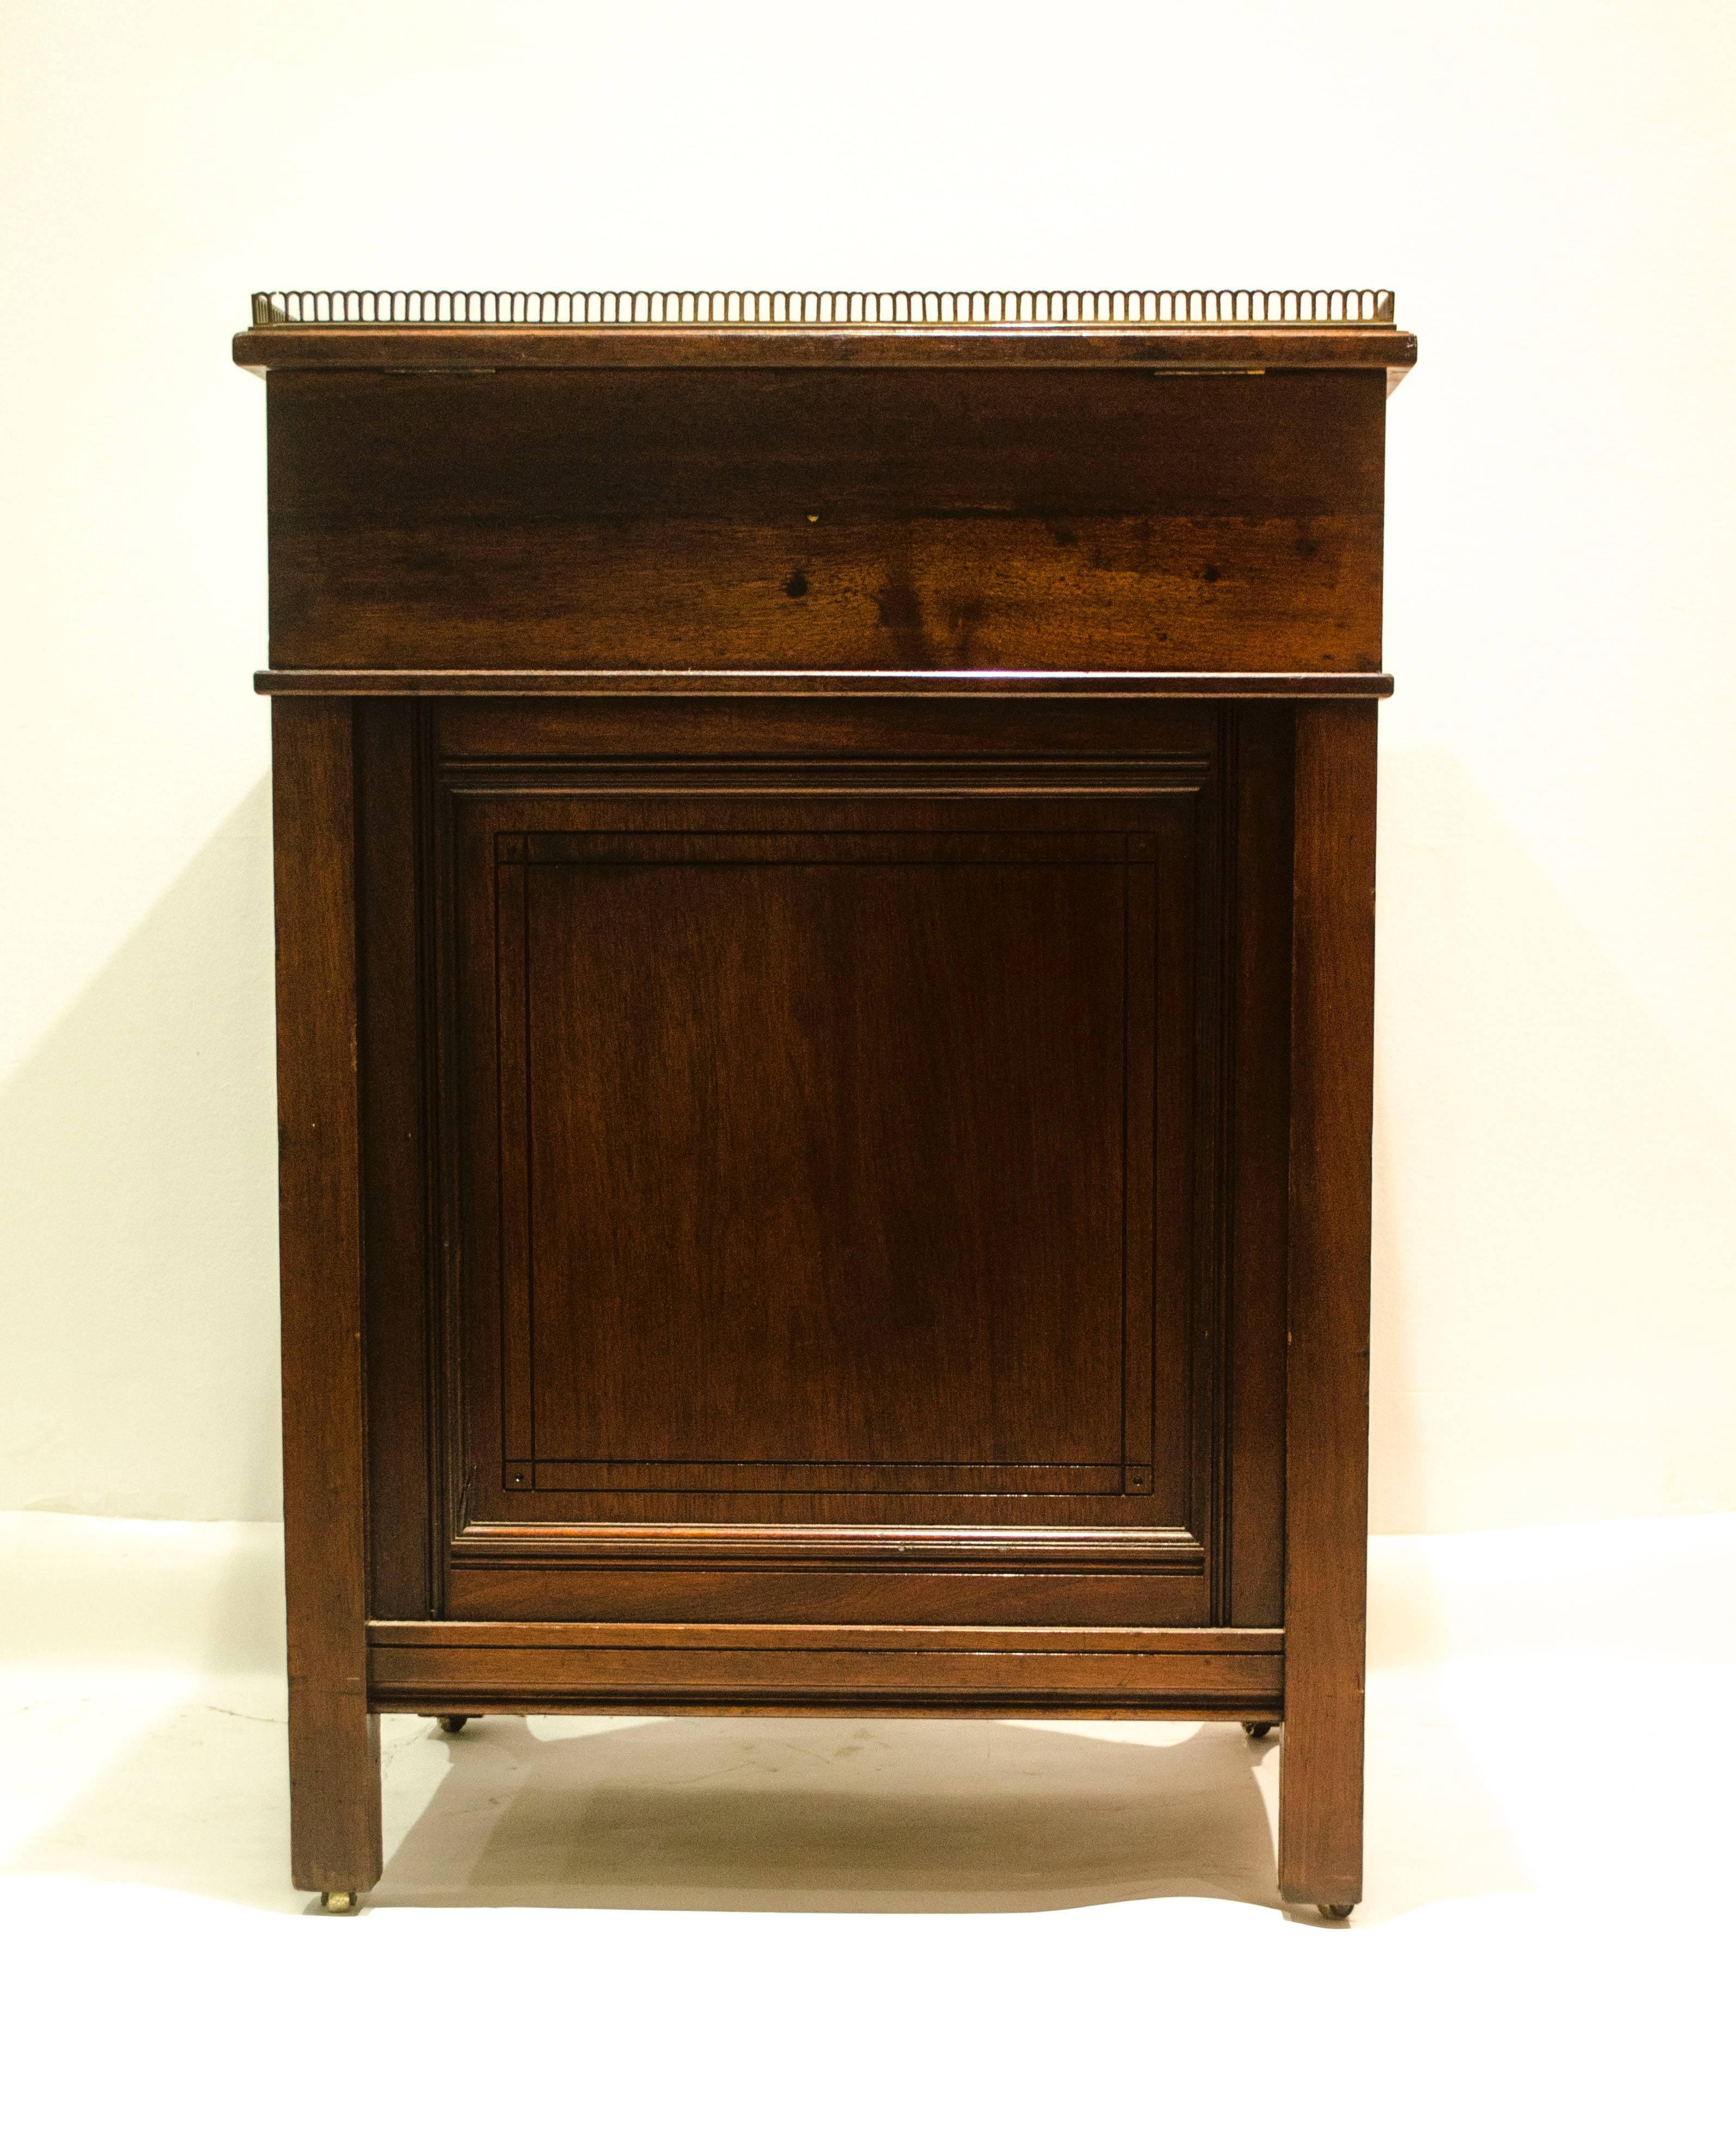 Mahogany B Talbert for Gillows Aesthetic Movement Davenport with Central Carved Rosette For Sale